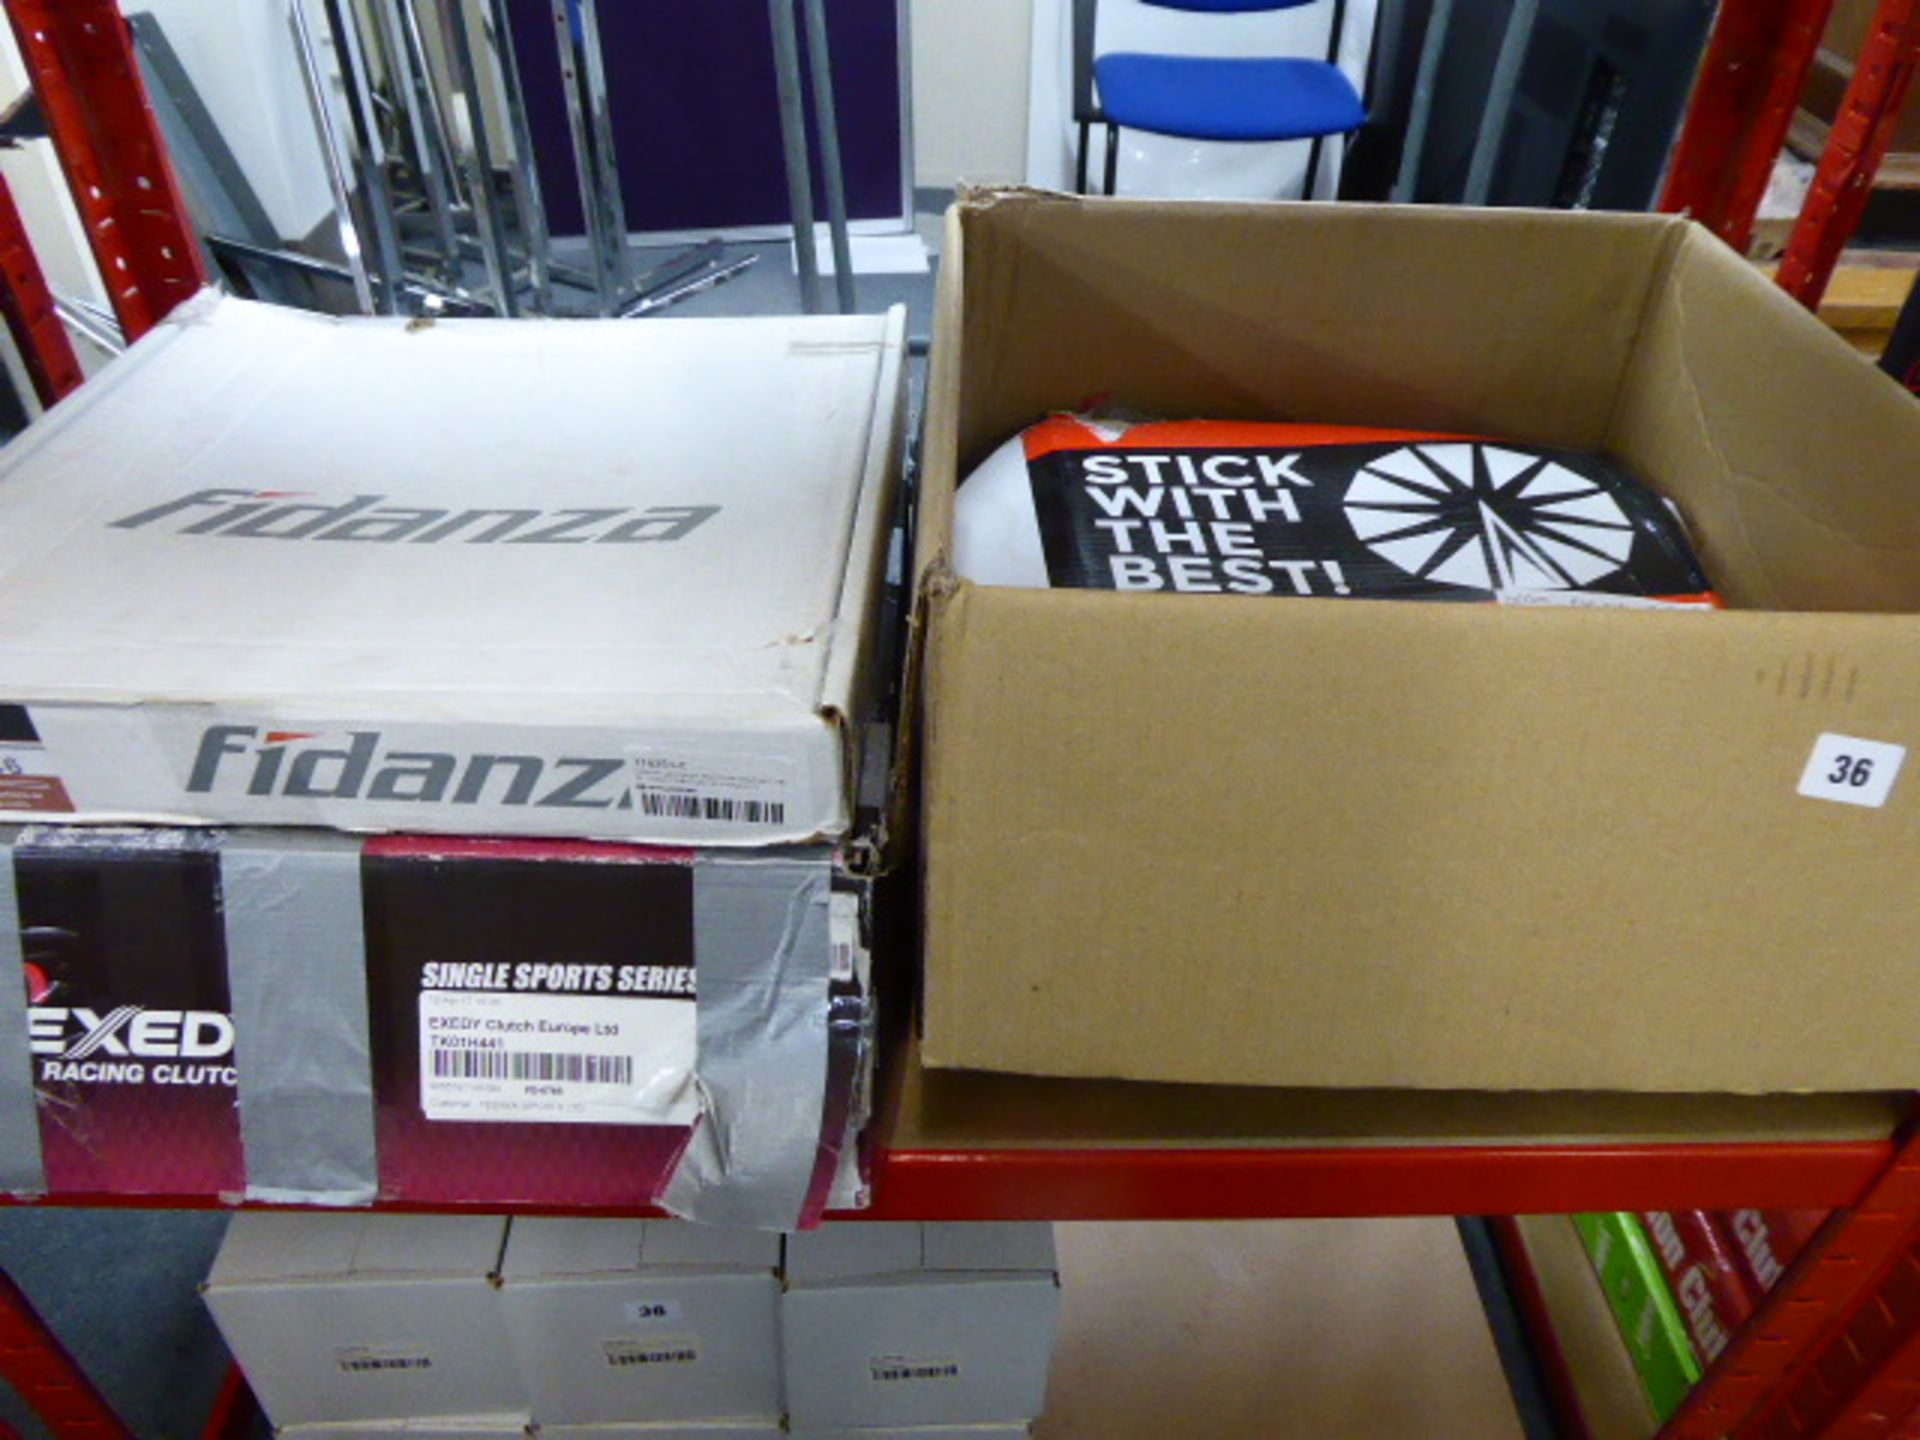 Two shelves of Exedy, Fidanza and Action Clutch clutch kits